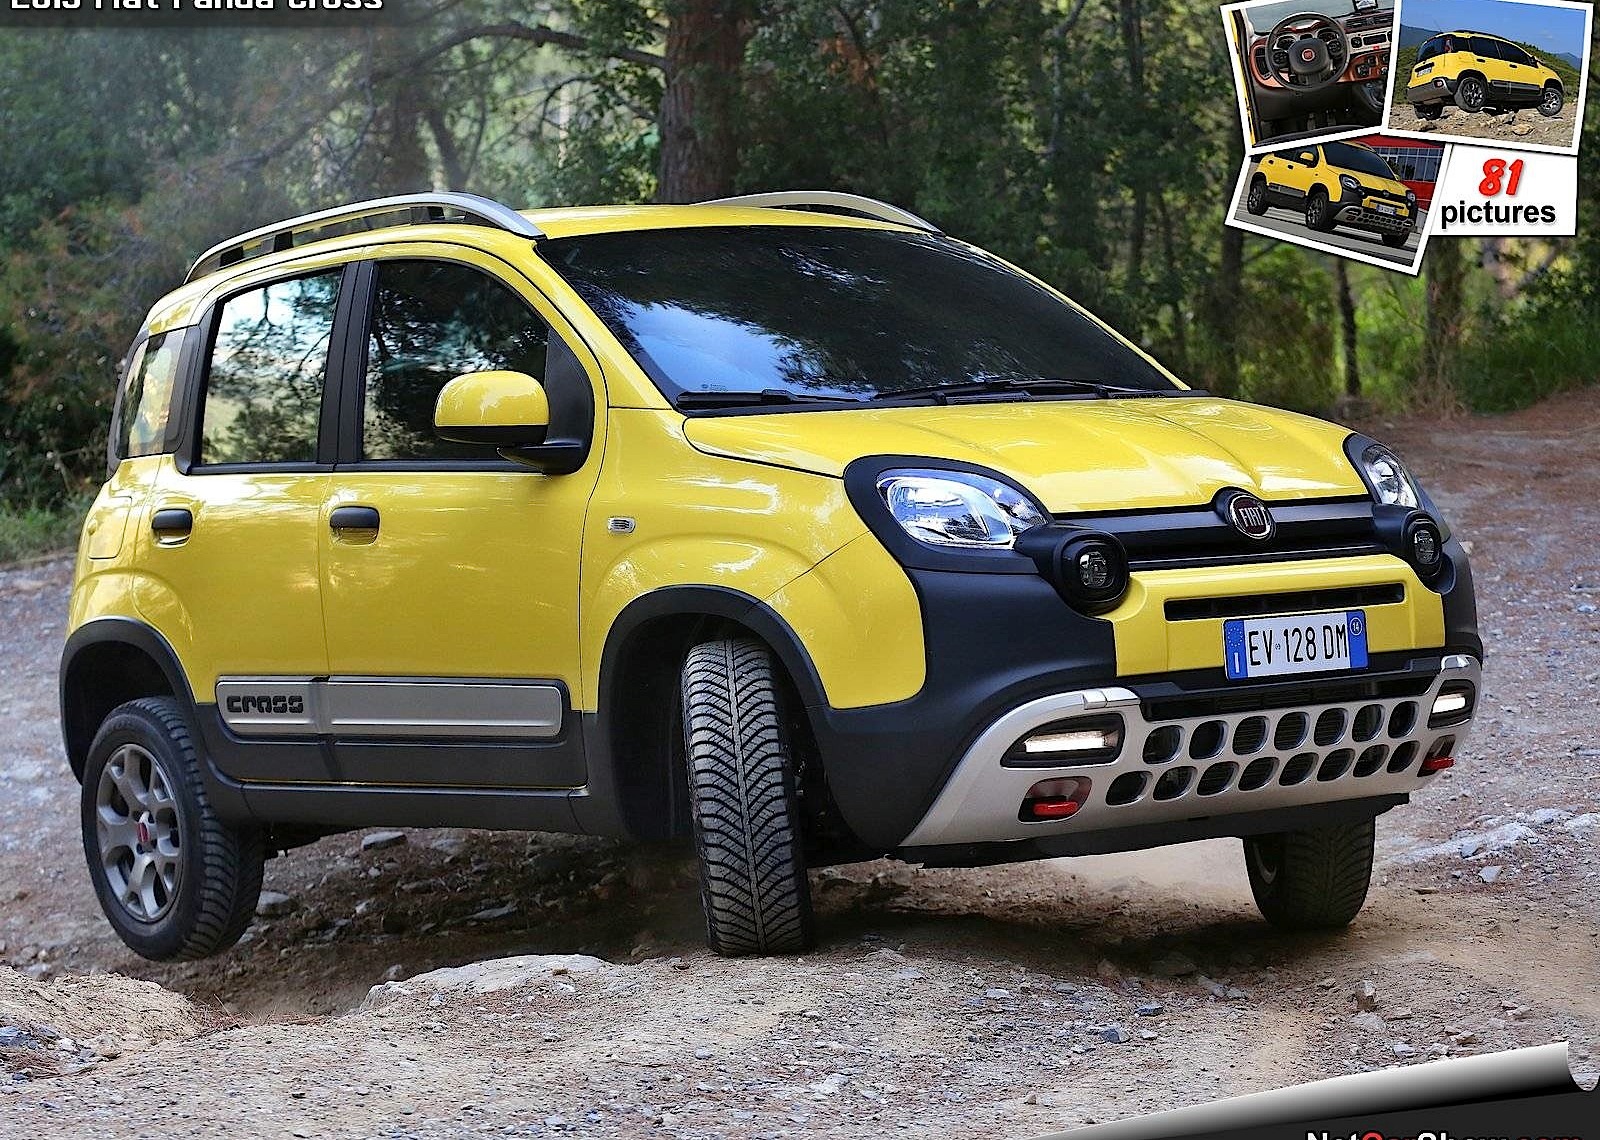 Cars America Missed Out On: Fiat Panda 4x4